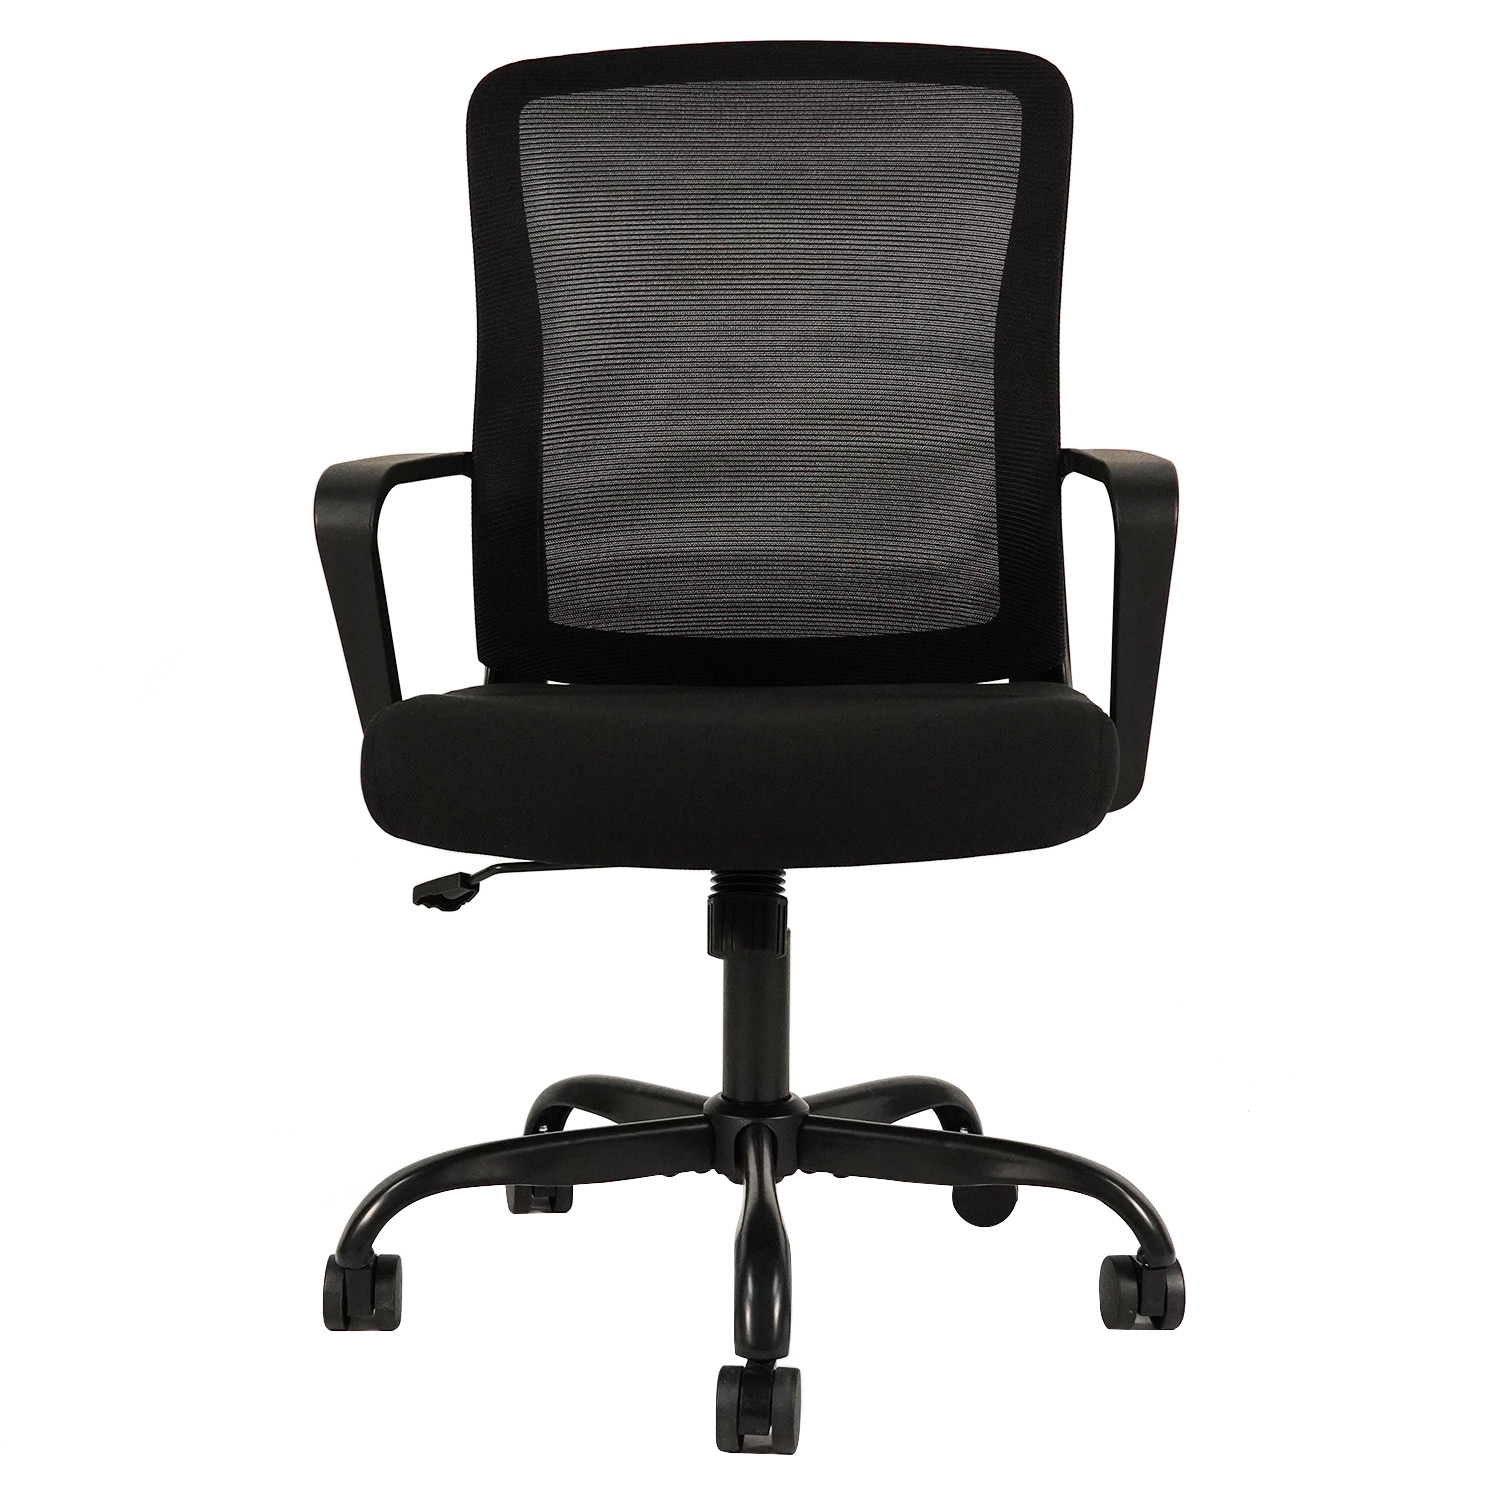 EnjoySeating Office Chair,Ergonomic Computer Task Chair Breathable Mesh Desk Office Chair with High-Density Foam Cushion Adjustable Height Home Office Desk Chairs